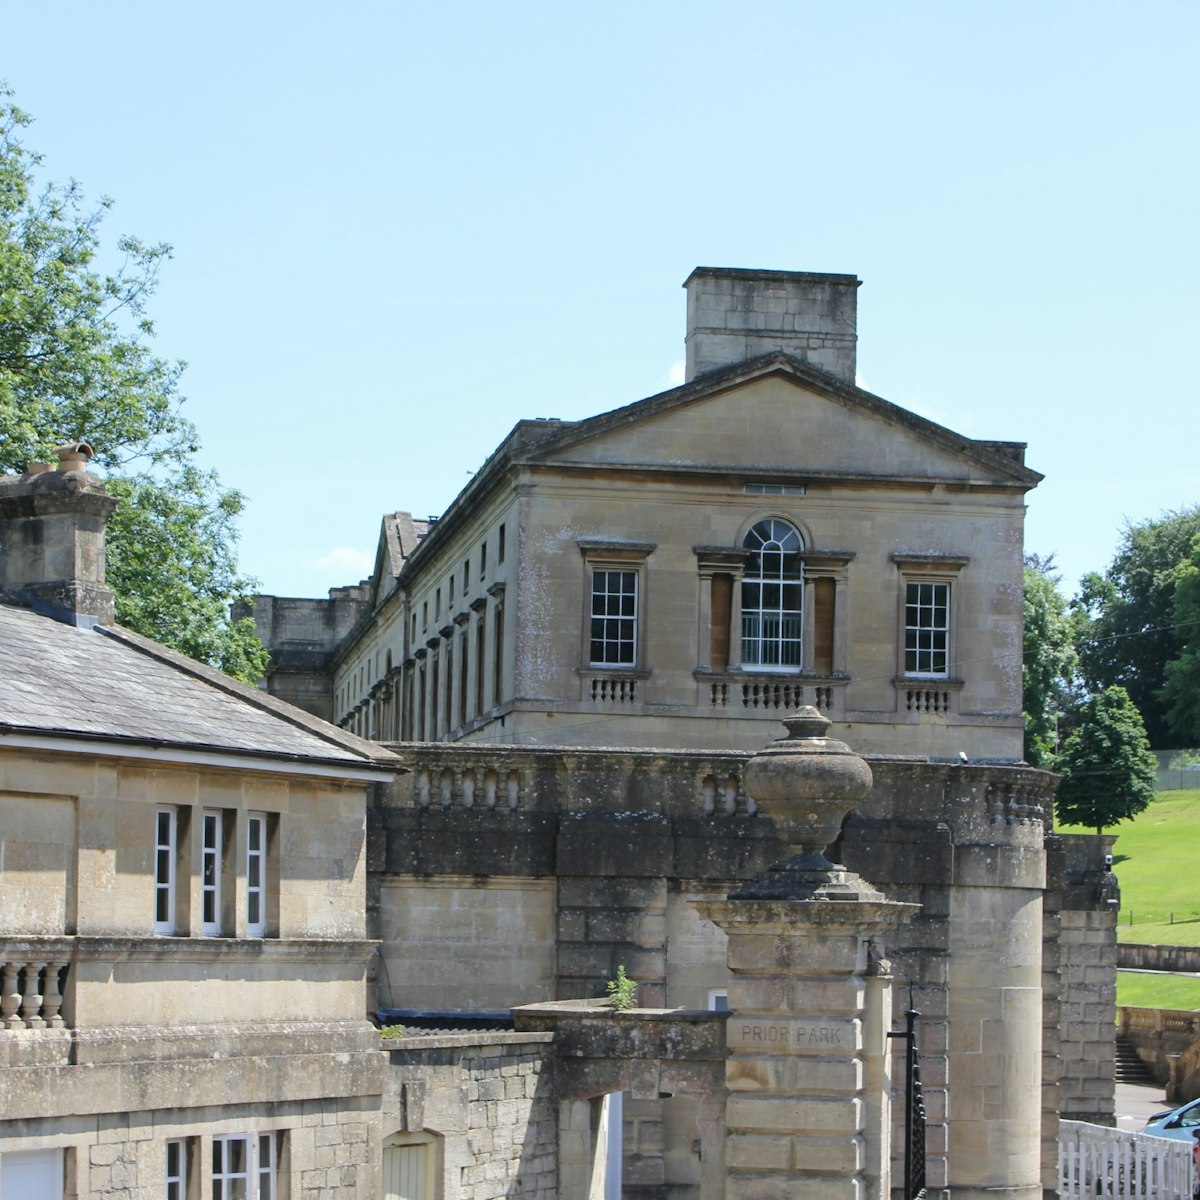 The entrance to Prior Park